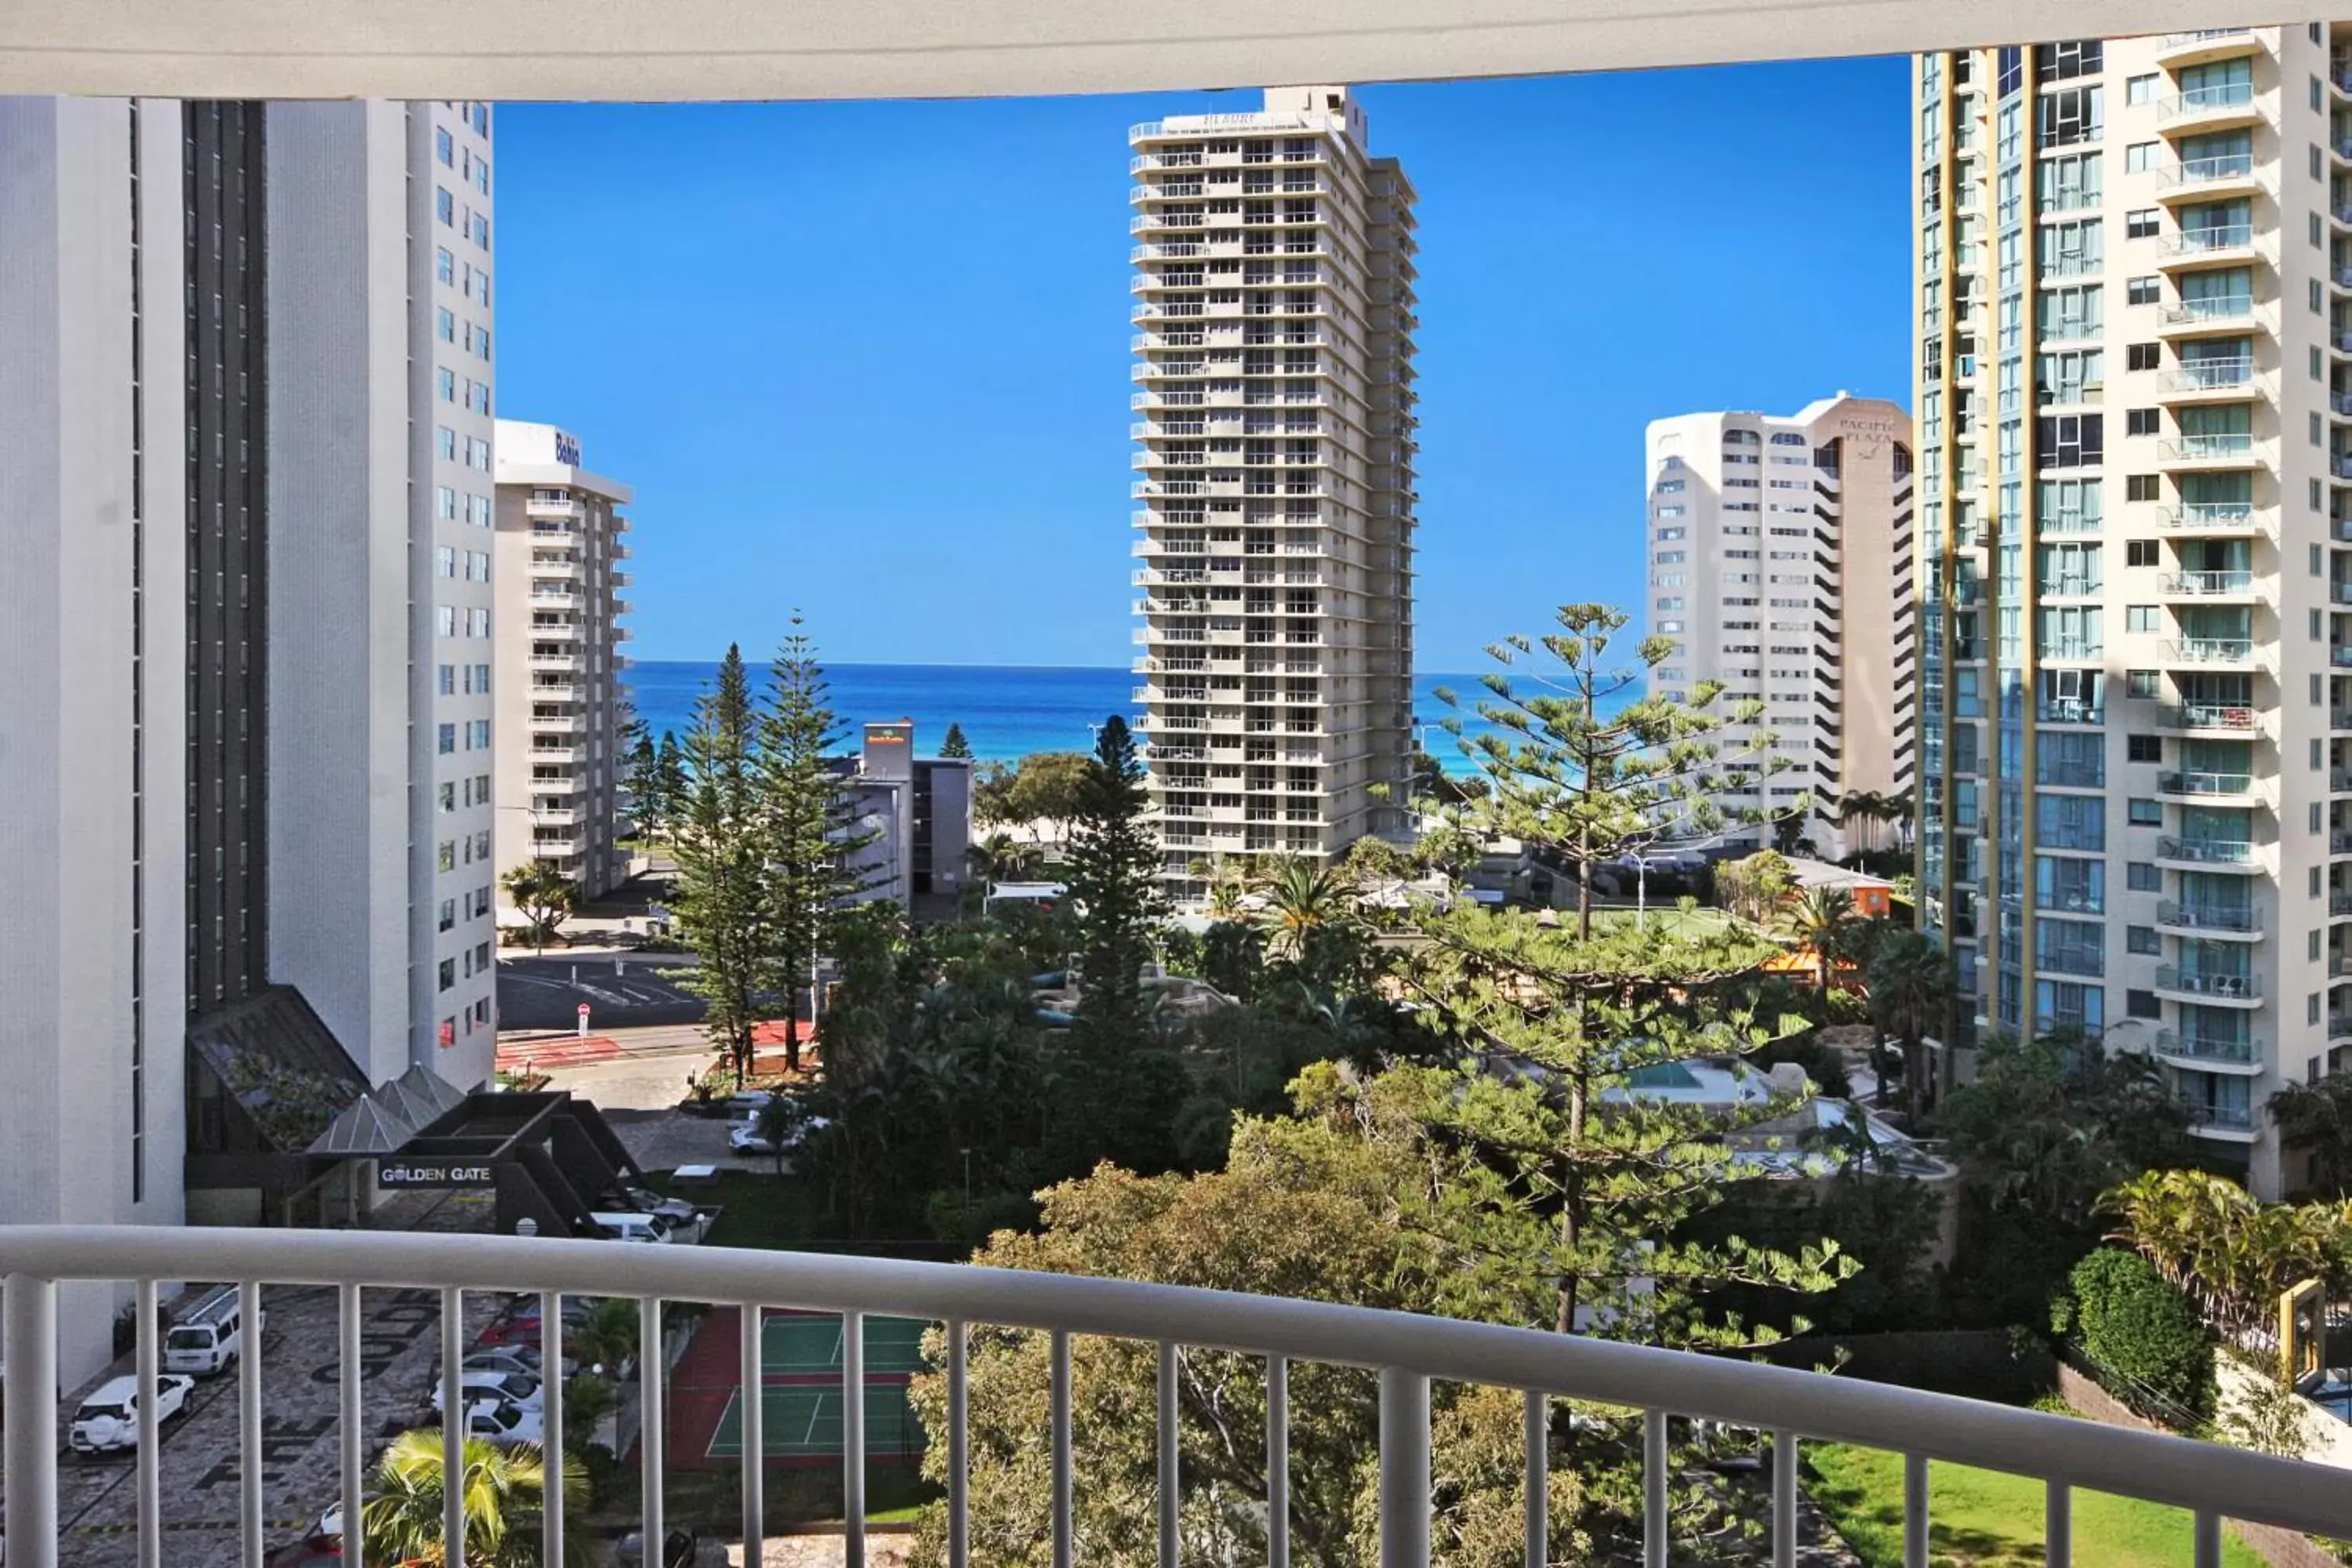 Balcony/Terrace in Sovereign on the Gold Coast